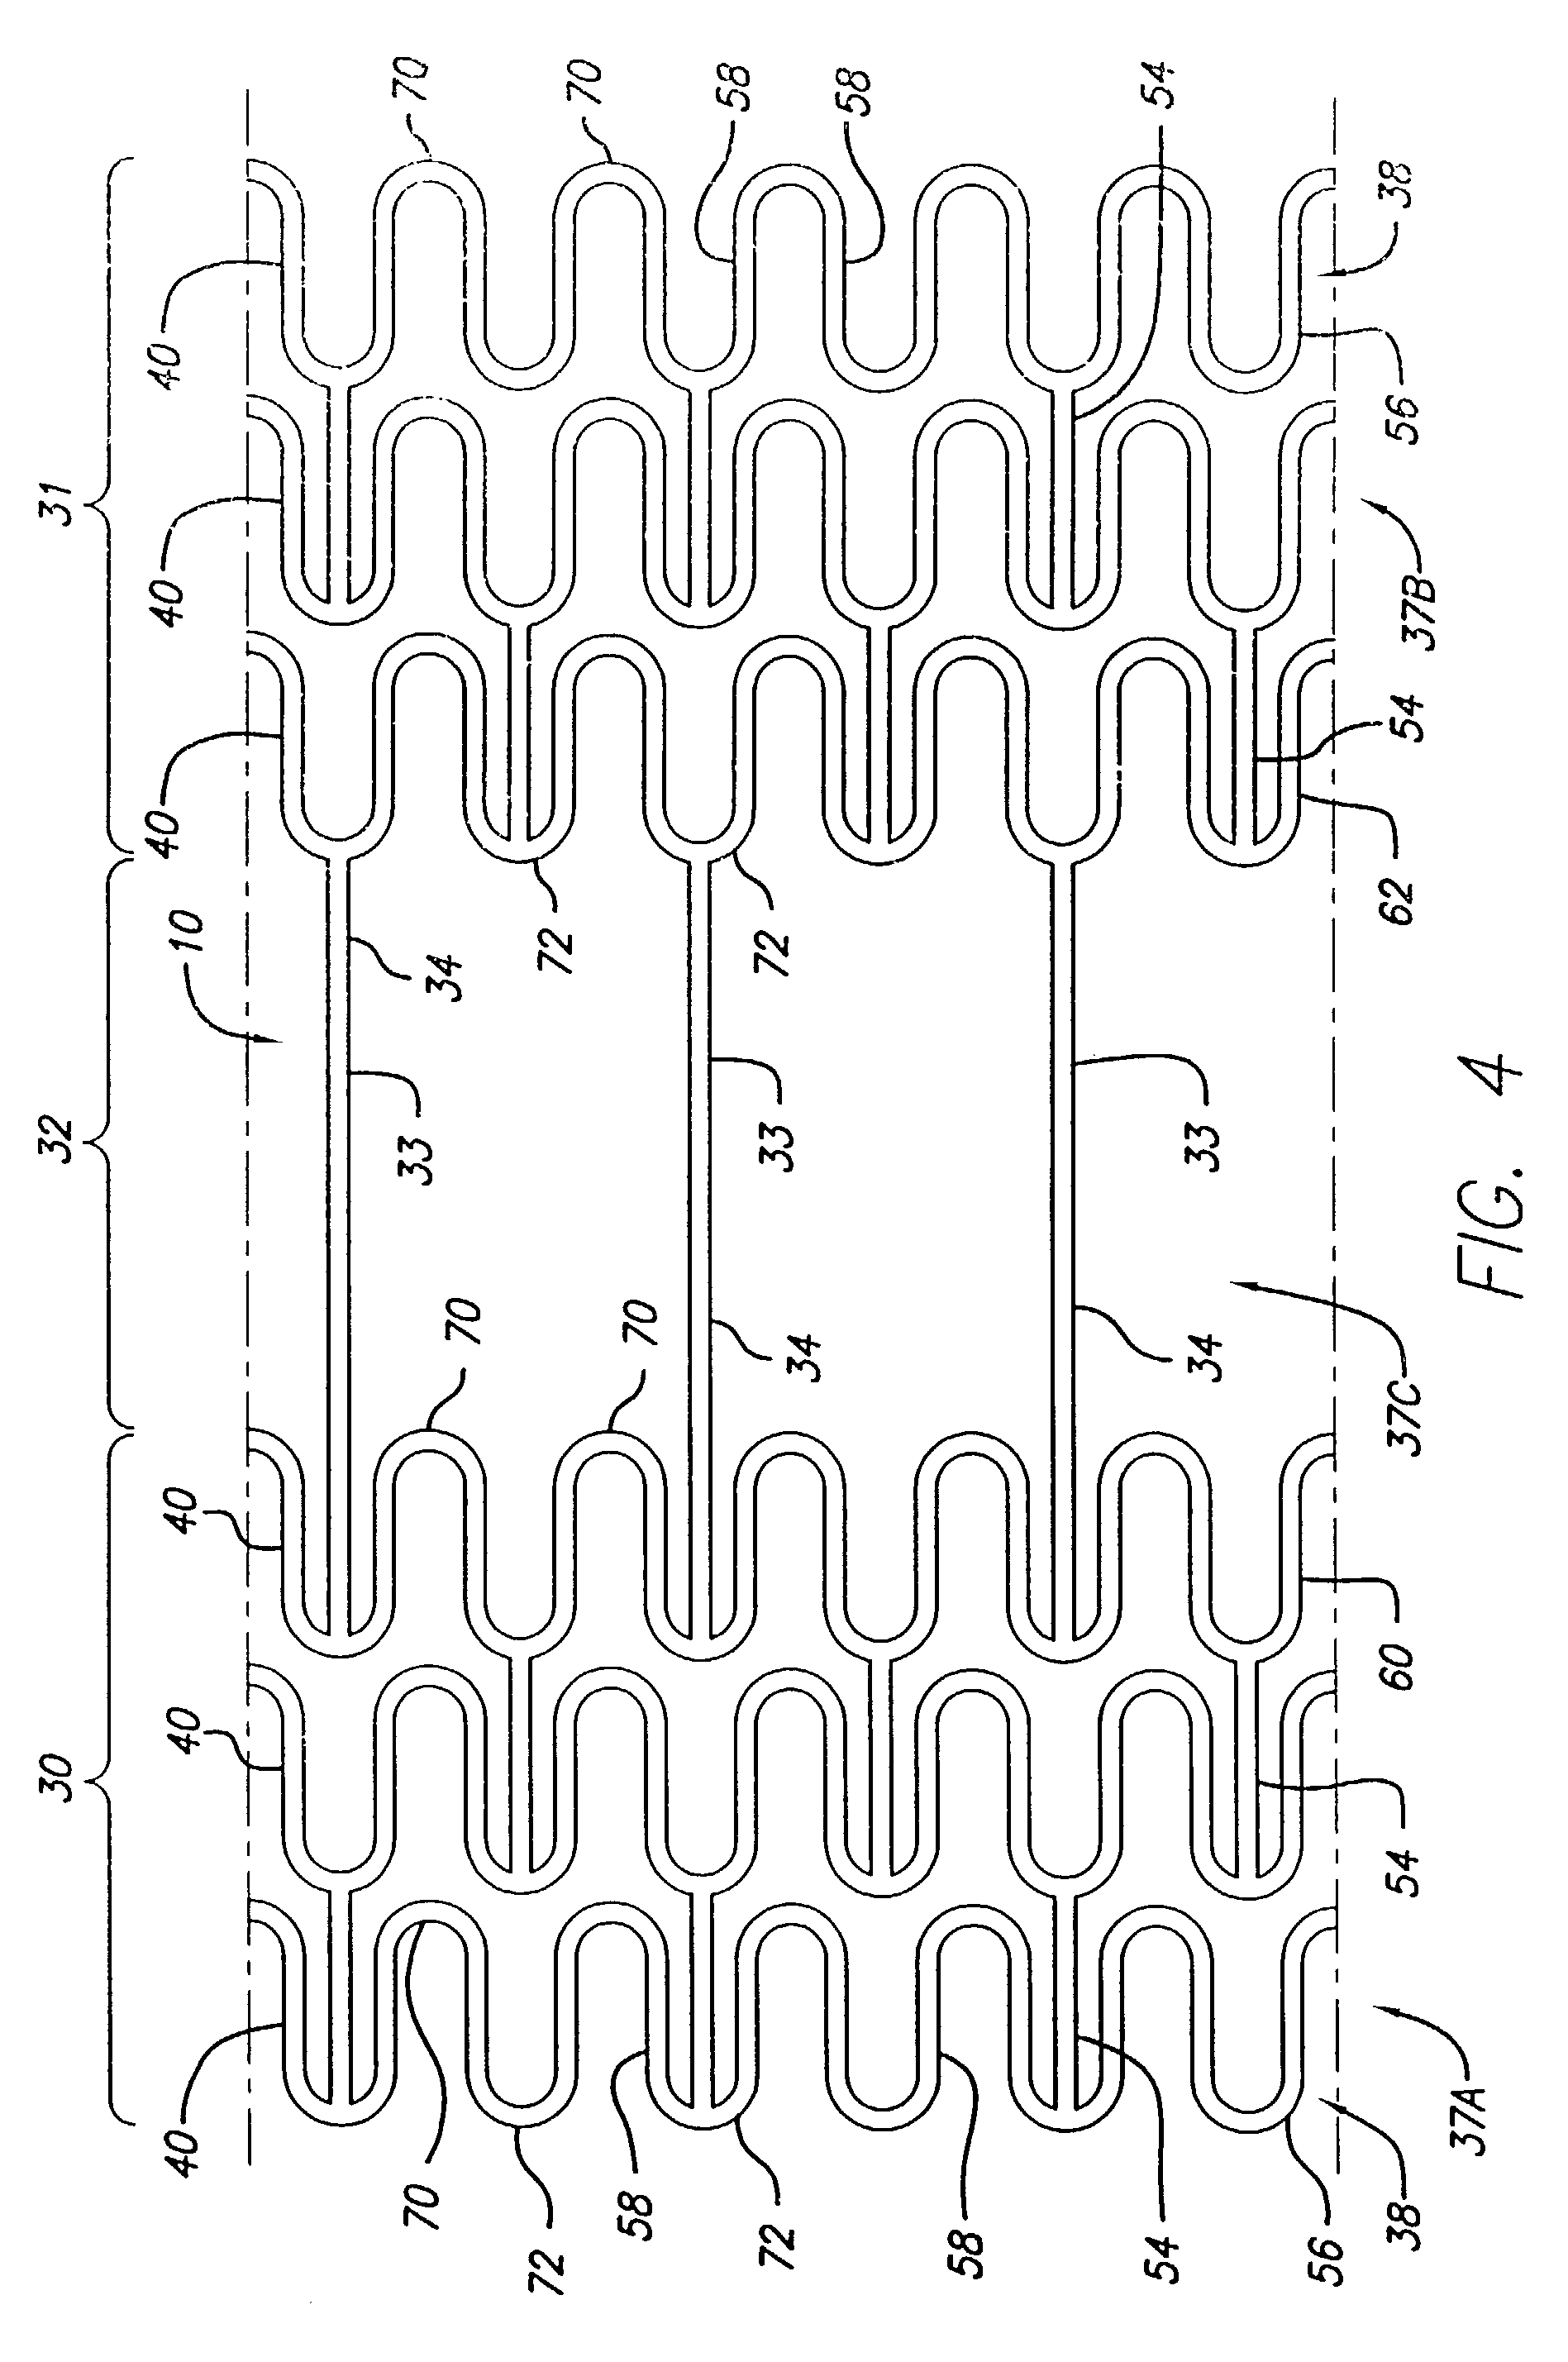 Intravascular stent and method of use